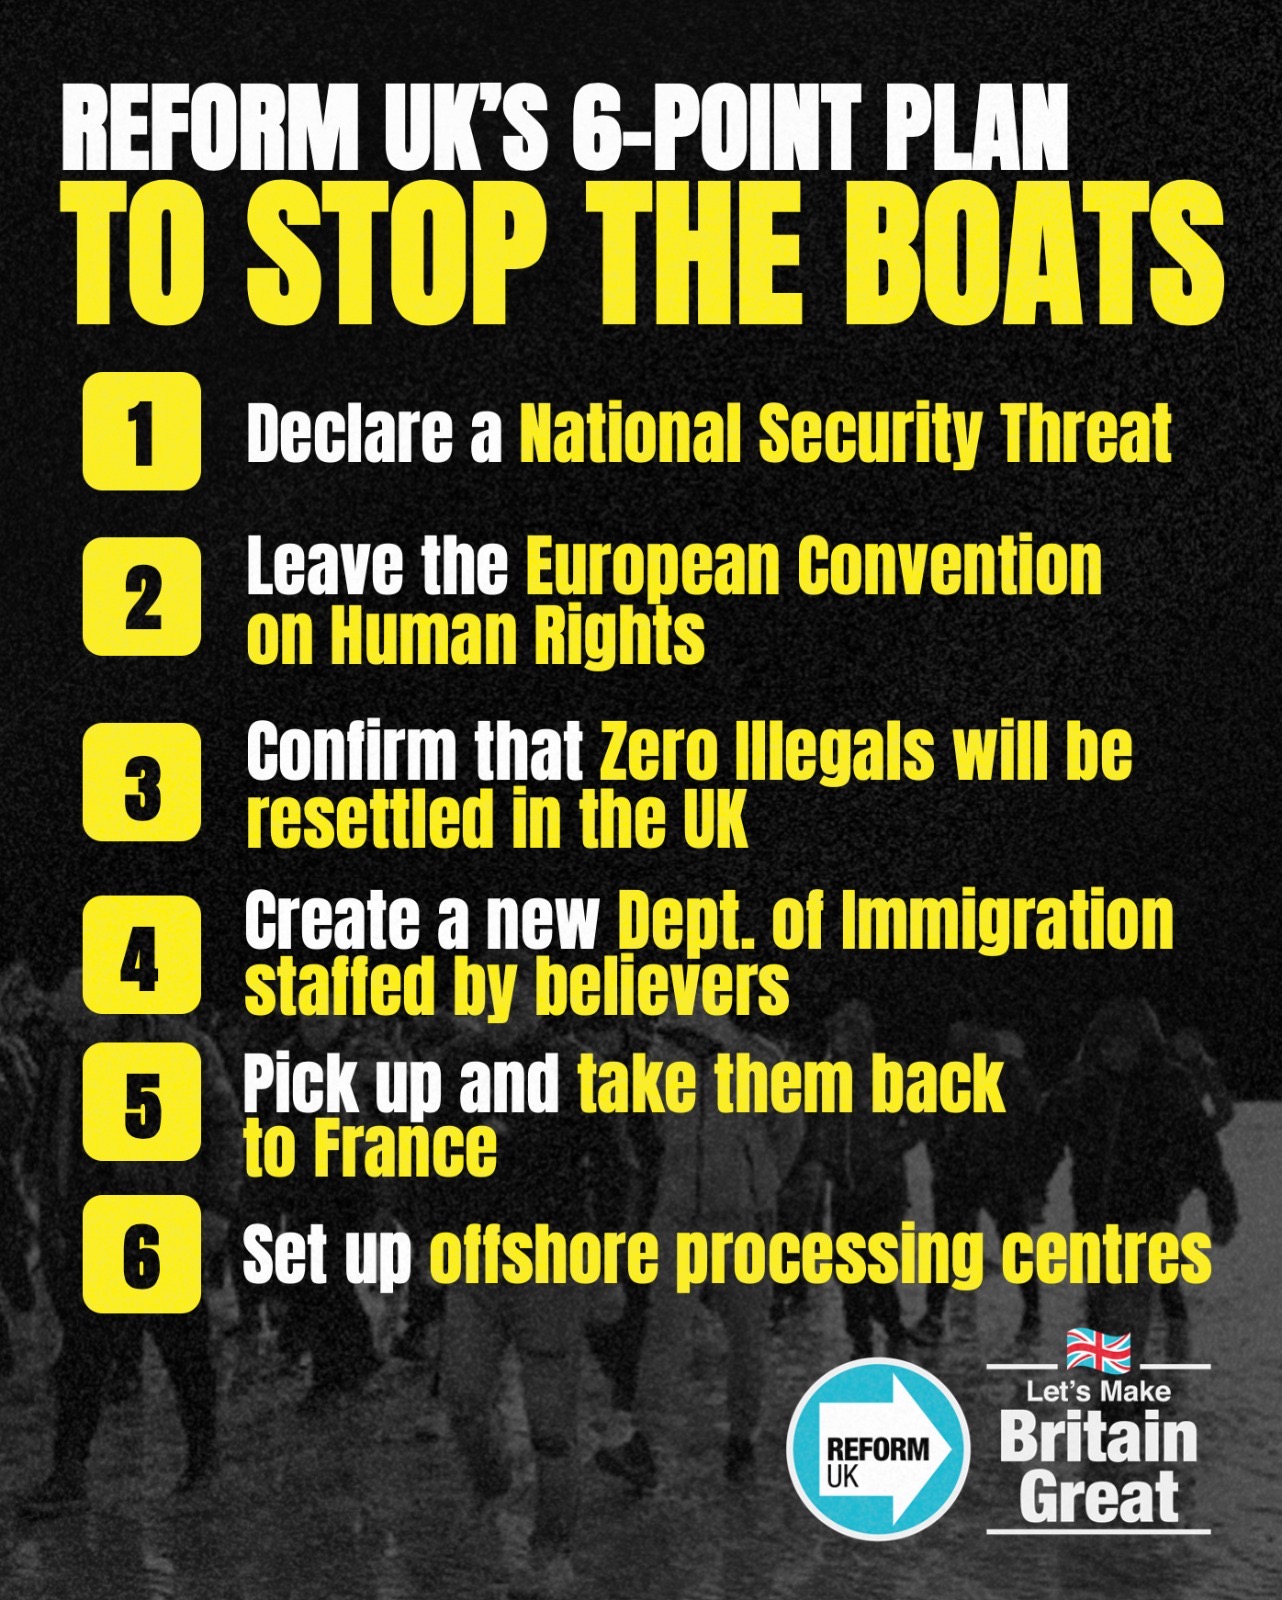 Reform UK's 6-point plan to stop the boats